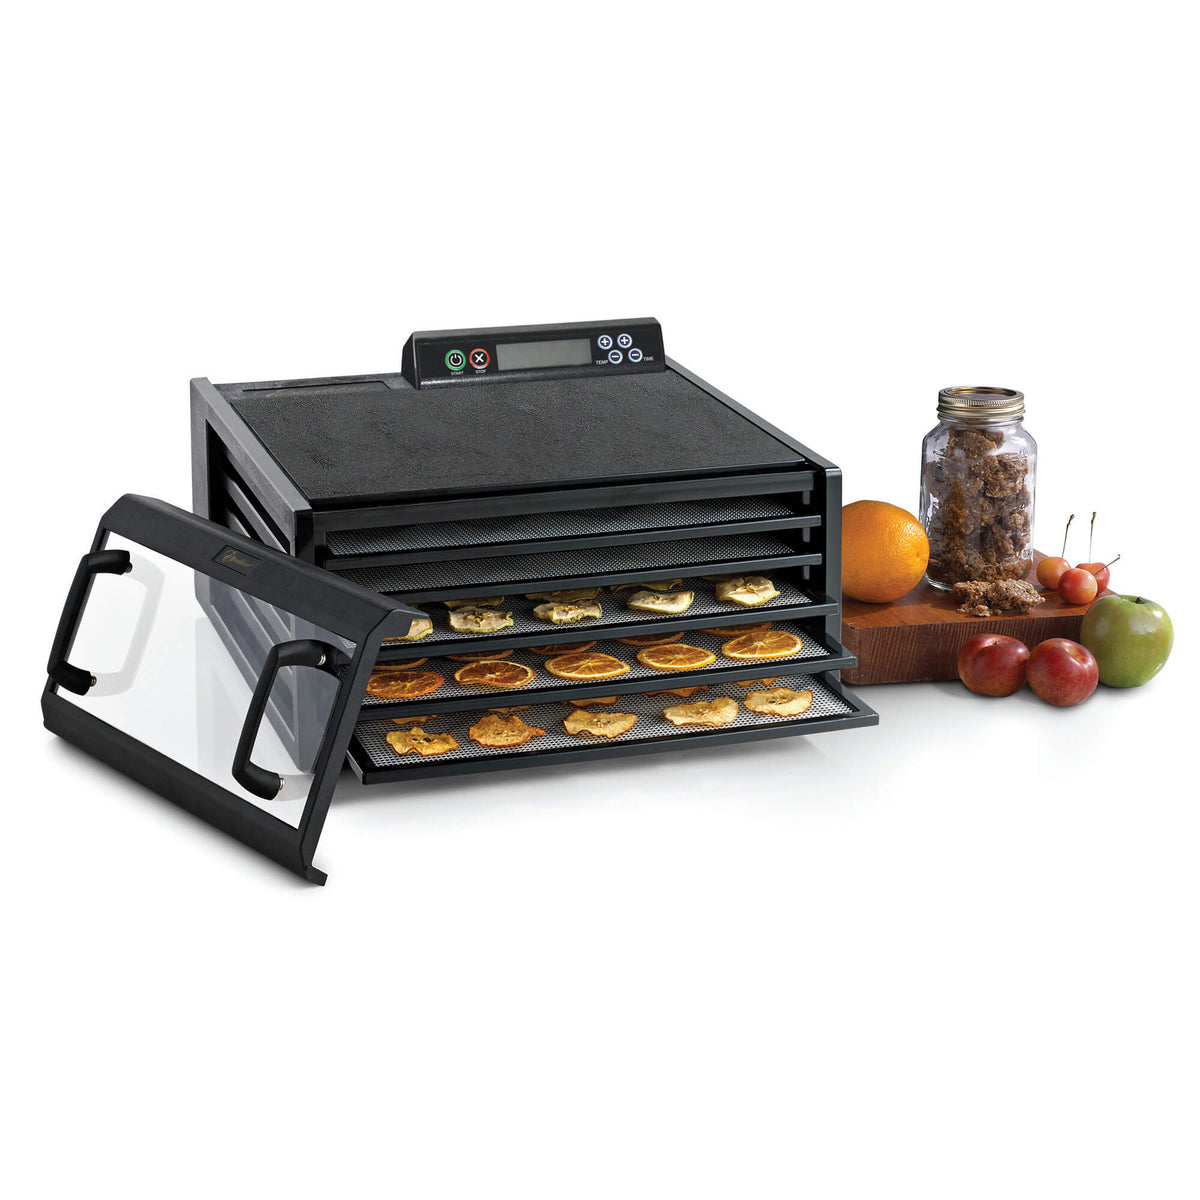 Excalibur 4548CDB 5 tray digital dehydrator with clear door propped to the side and food on the trays.